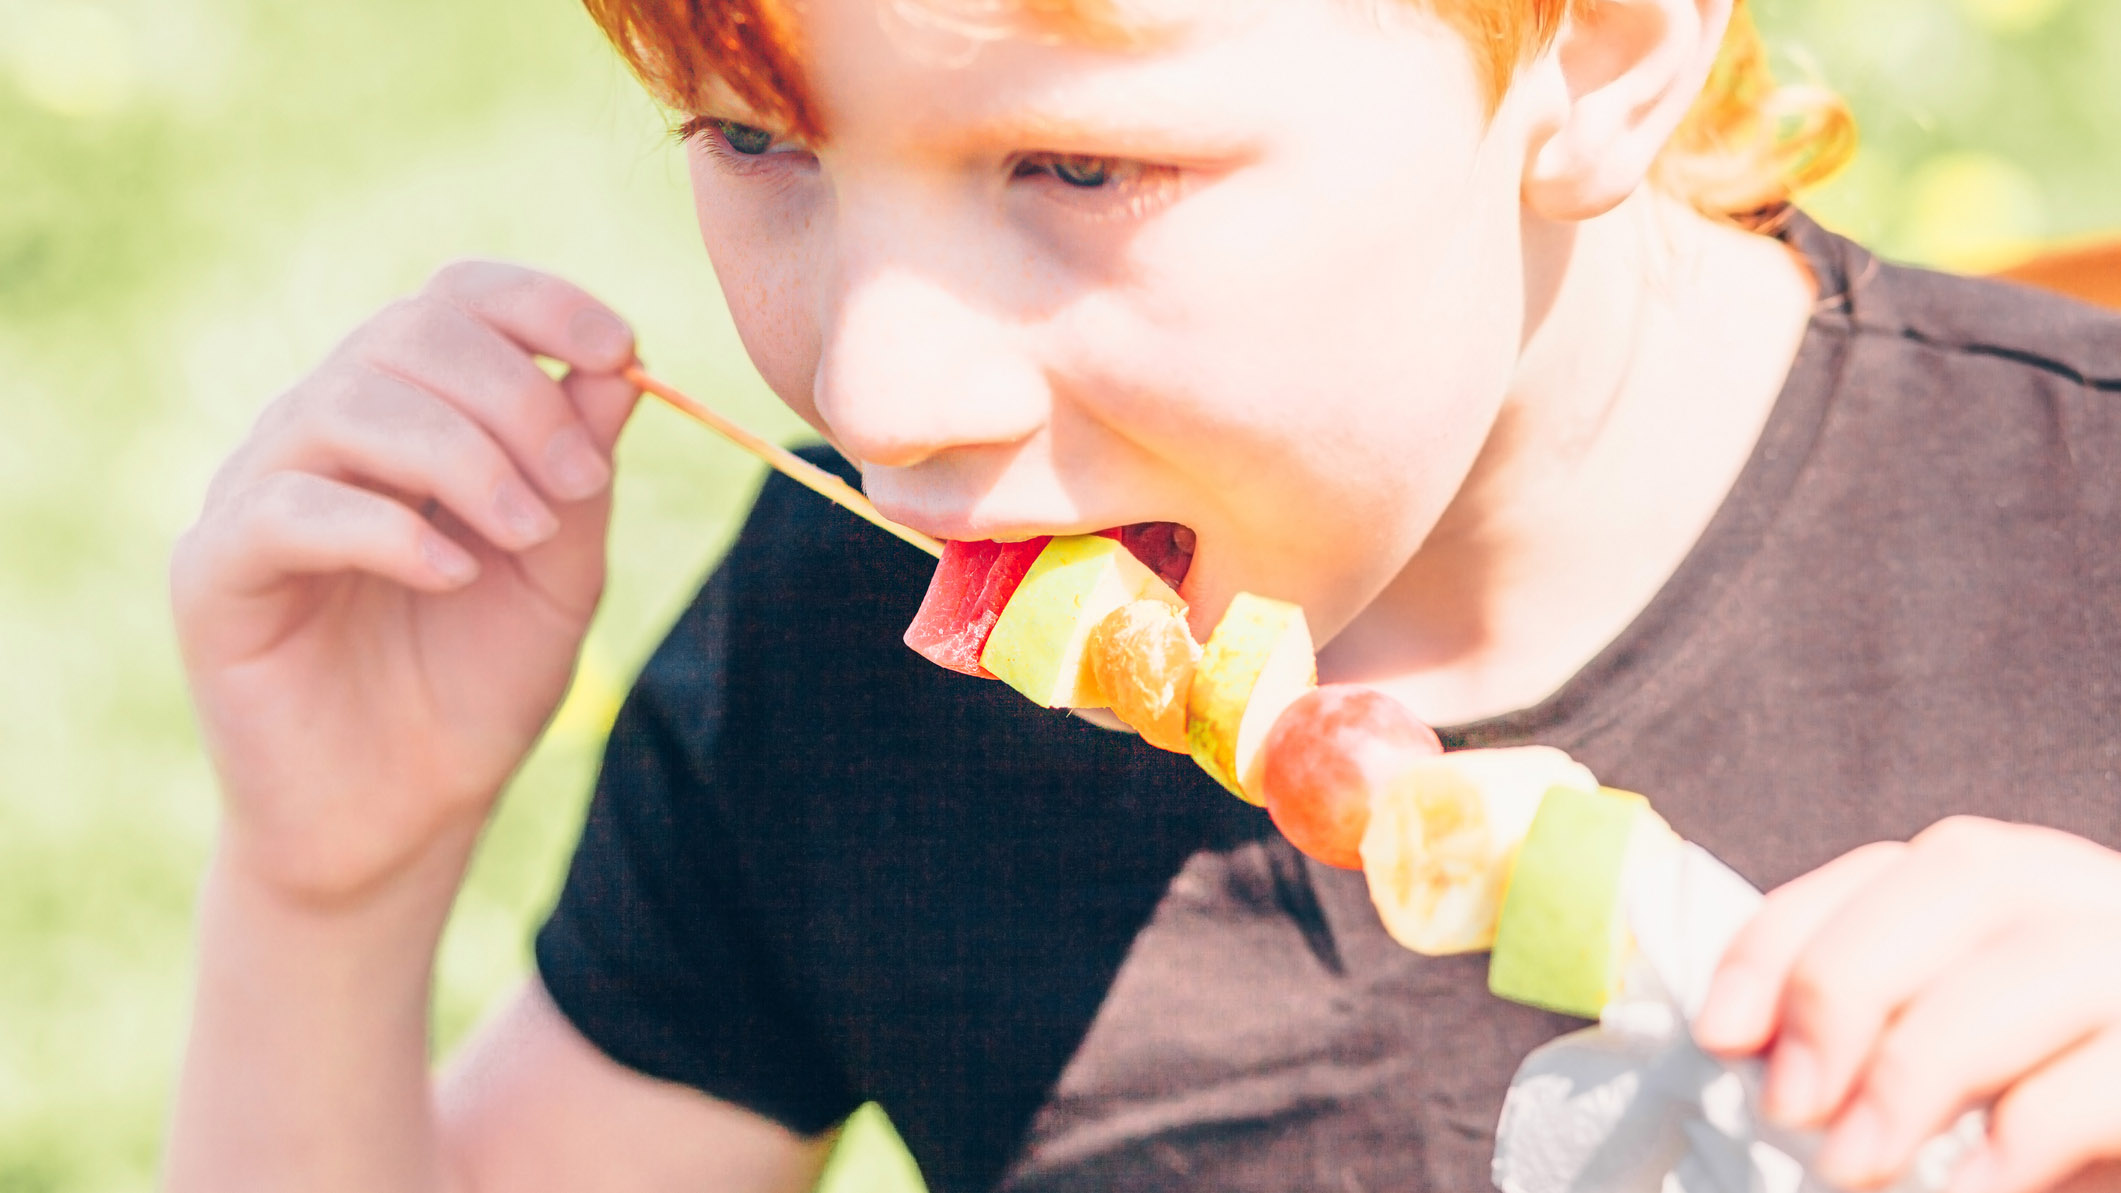 Red-haired boy eating a fruit kabob with berries and other fresh fruit on a wooden skewer